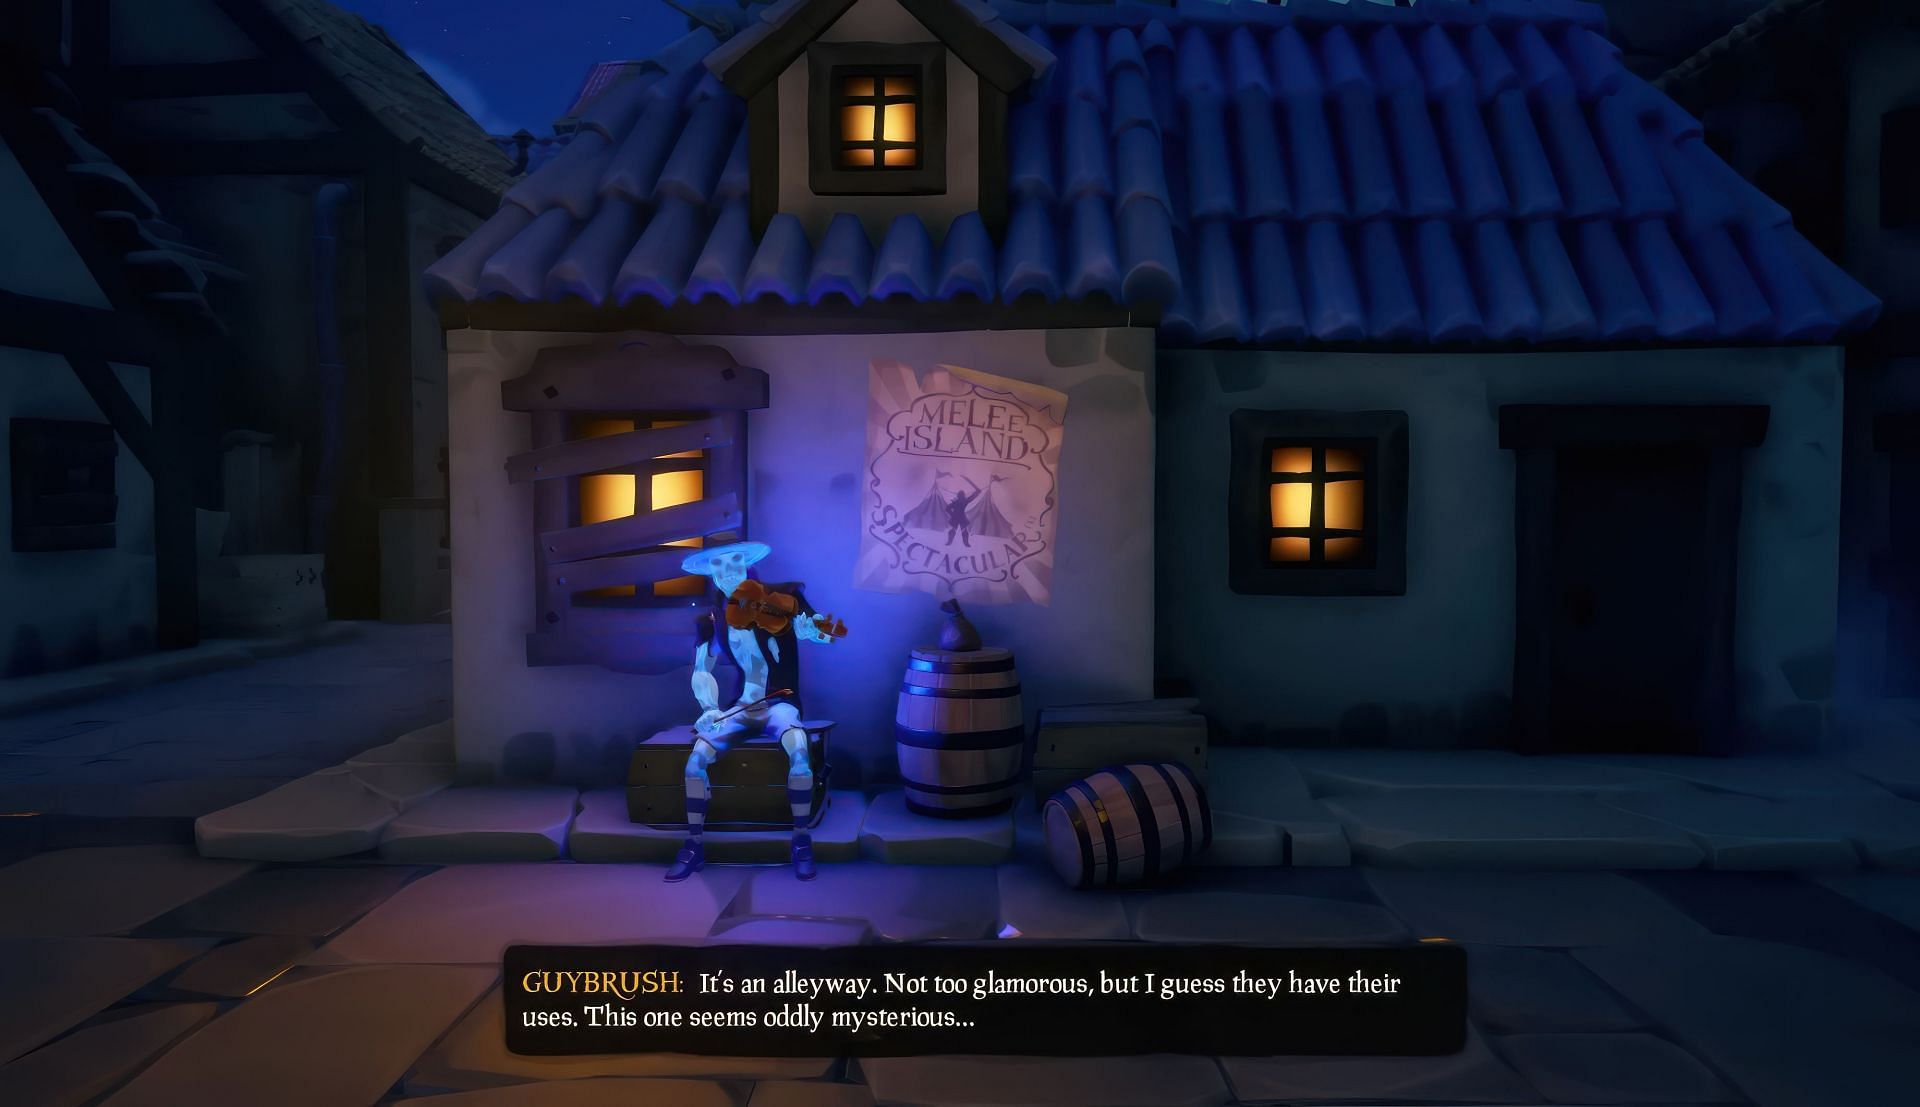 How to do the 'Prison Break' Commendation in Sea of Thieves' The Journey to  Mêlée Island Tall Tale - Rare Thief